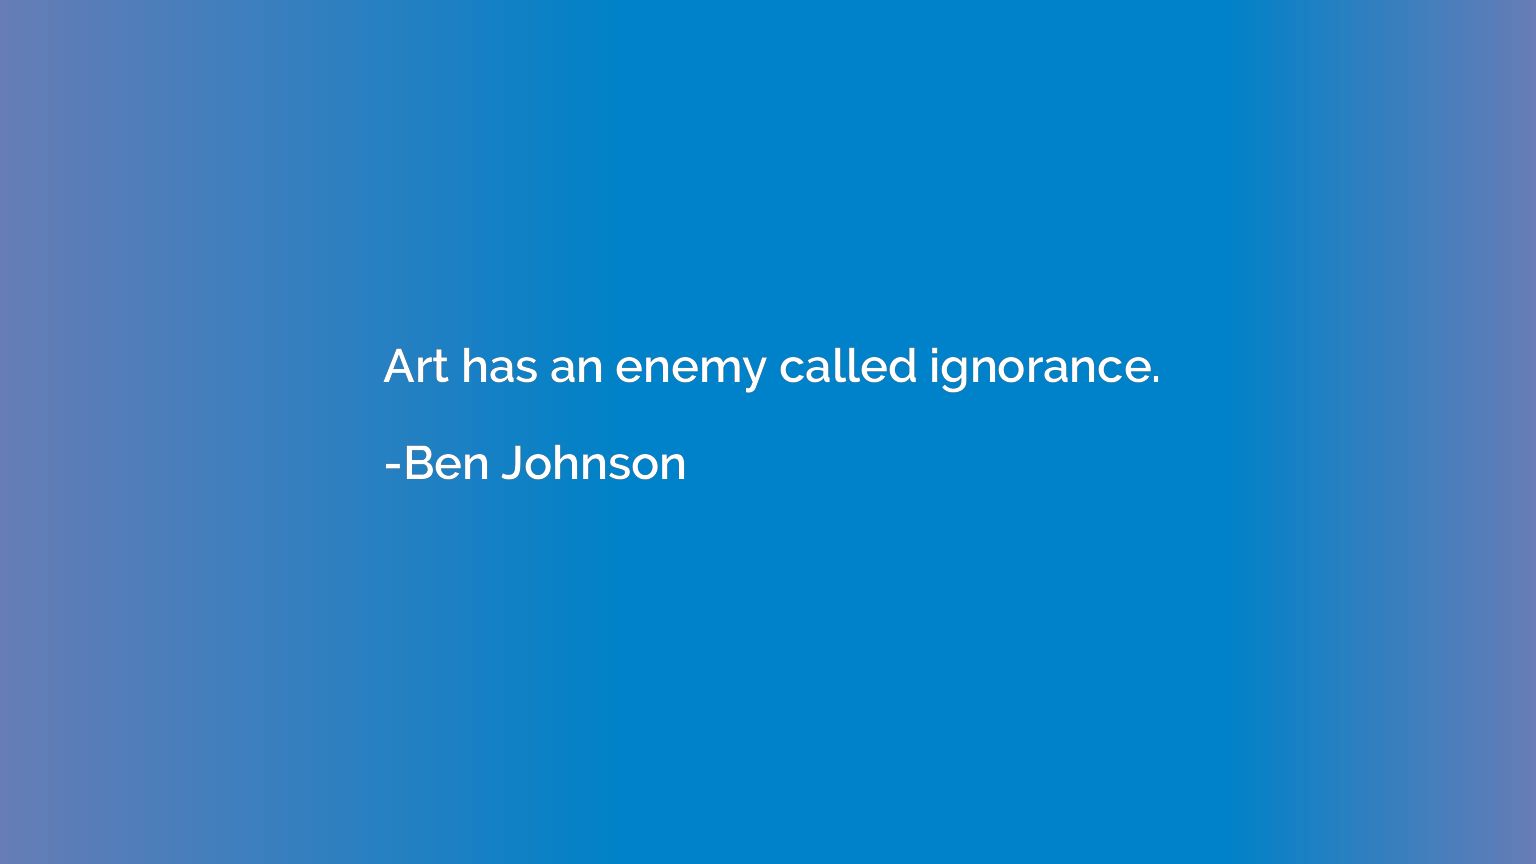 Art has an enemy called ignorance.